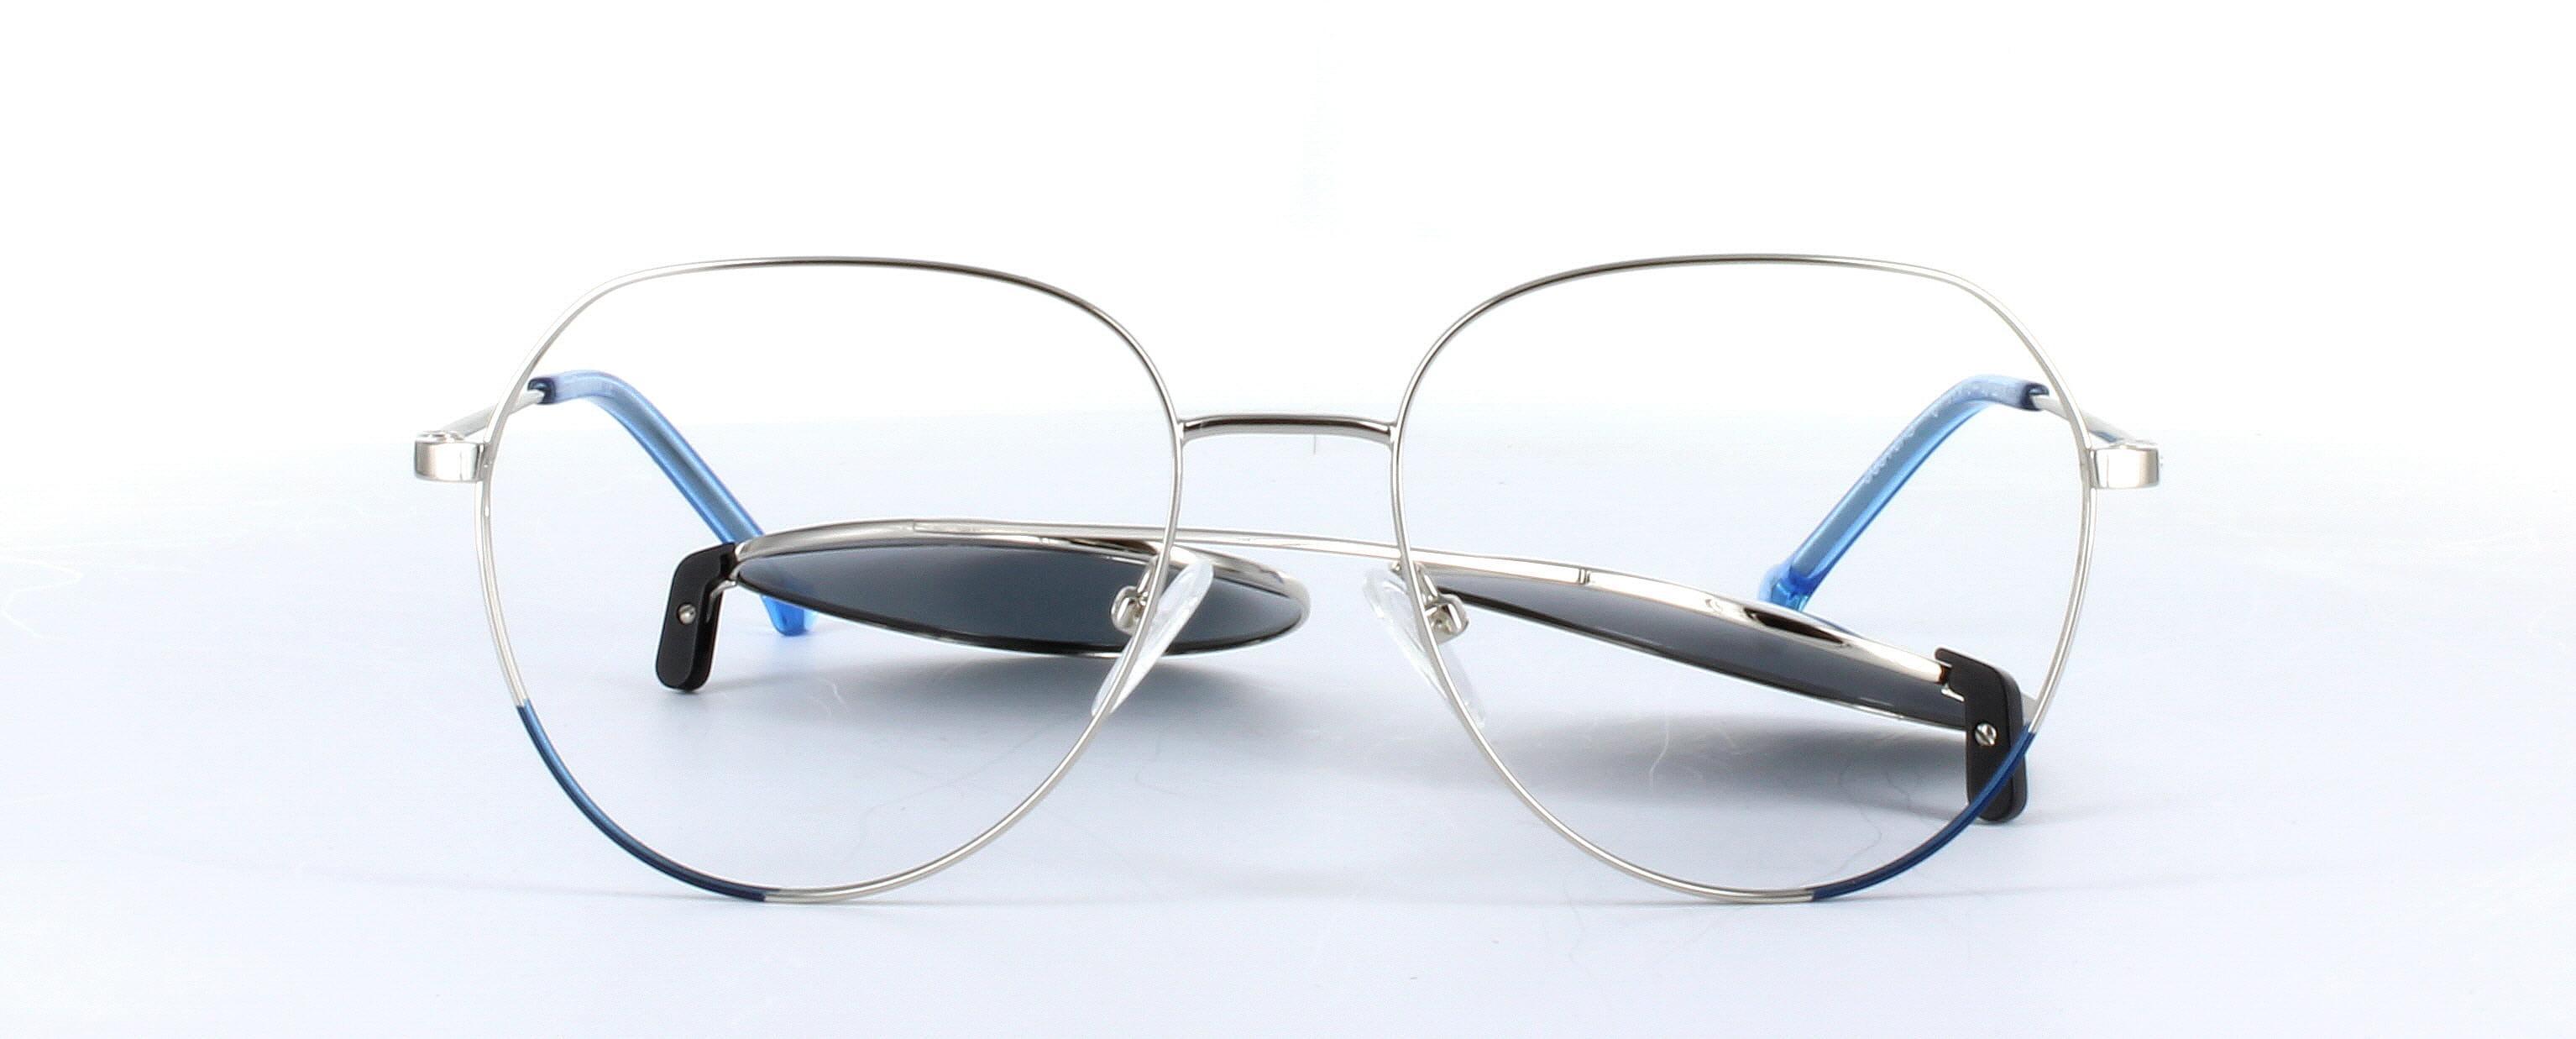 Eyecroxx 612-C3 Silver and Blue Full Rim Metal Glasses - Image View 5